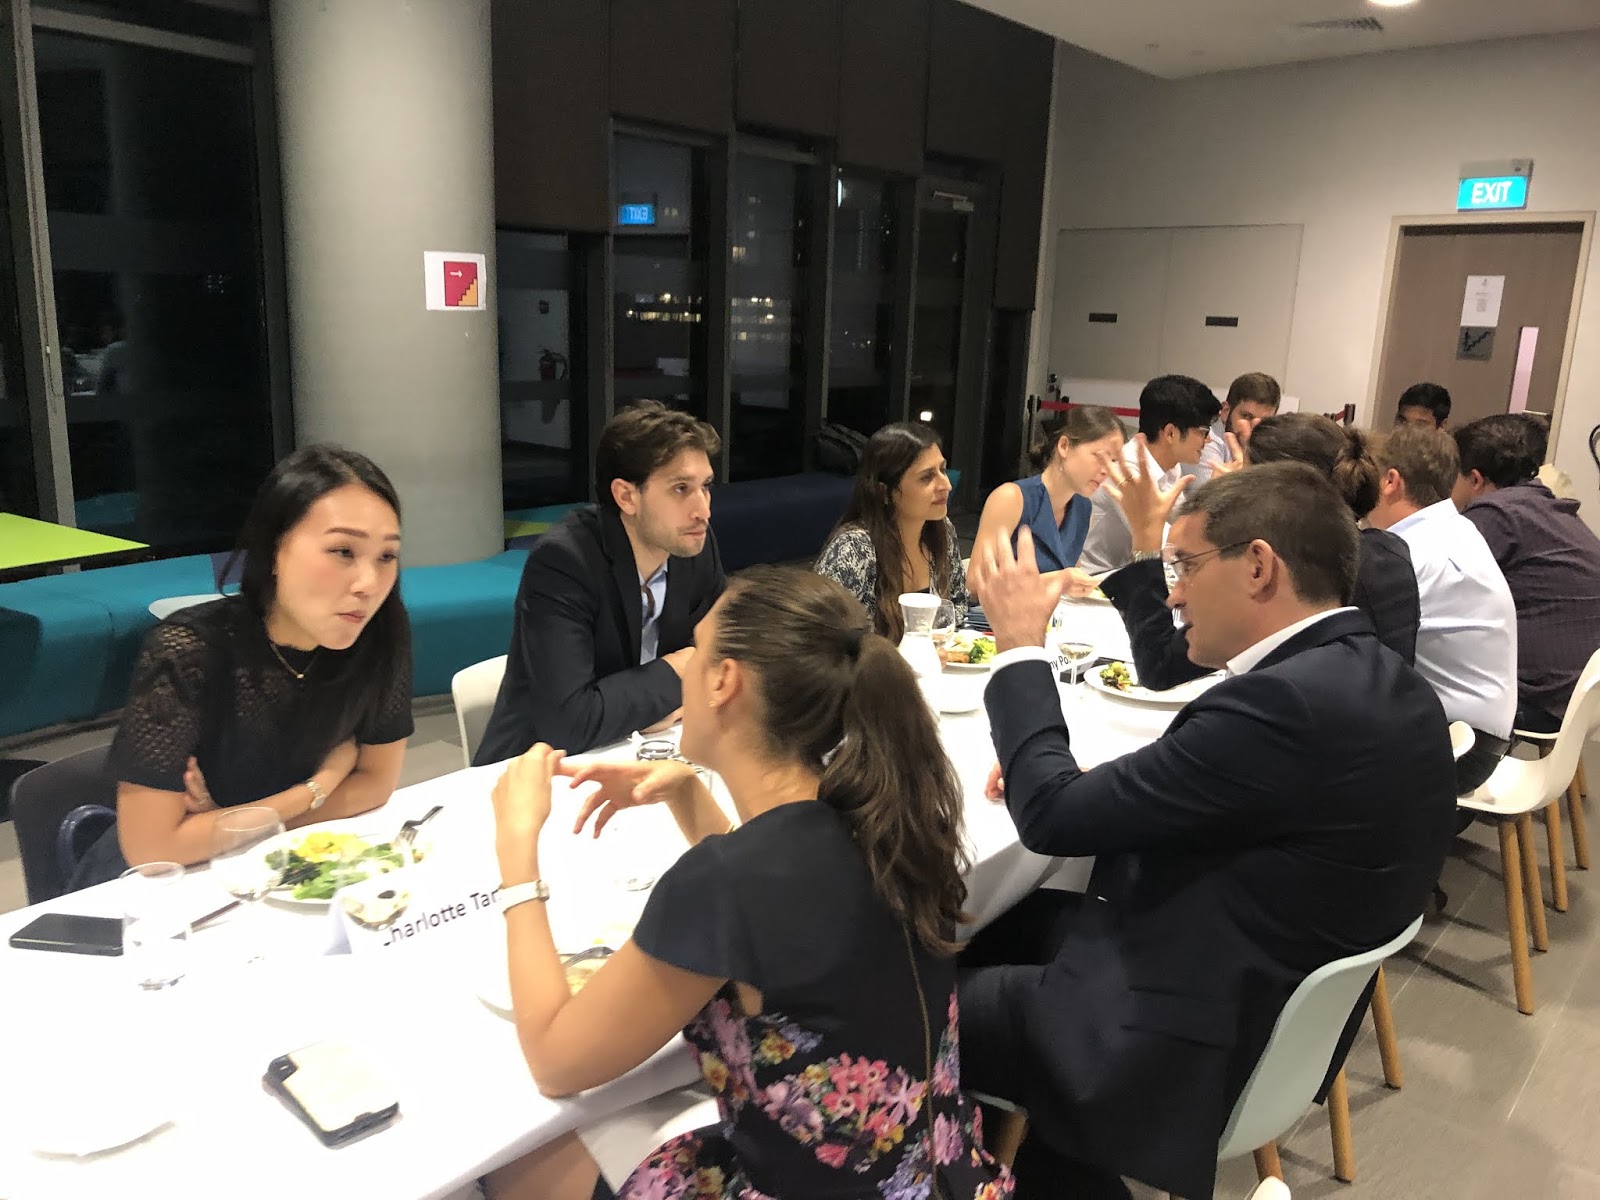 ESSEC LVMH Chair - The main goal of the ESSEC LVMH Chair is to prepare  young talents for careers in the luxury industry. To succeed in this, the  Chair gives students the